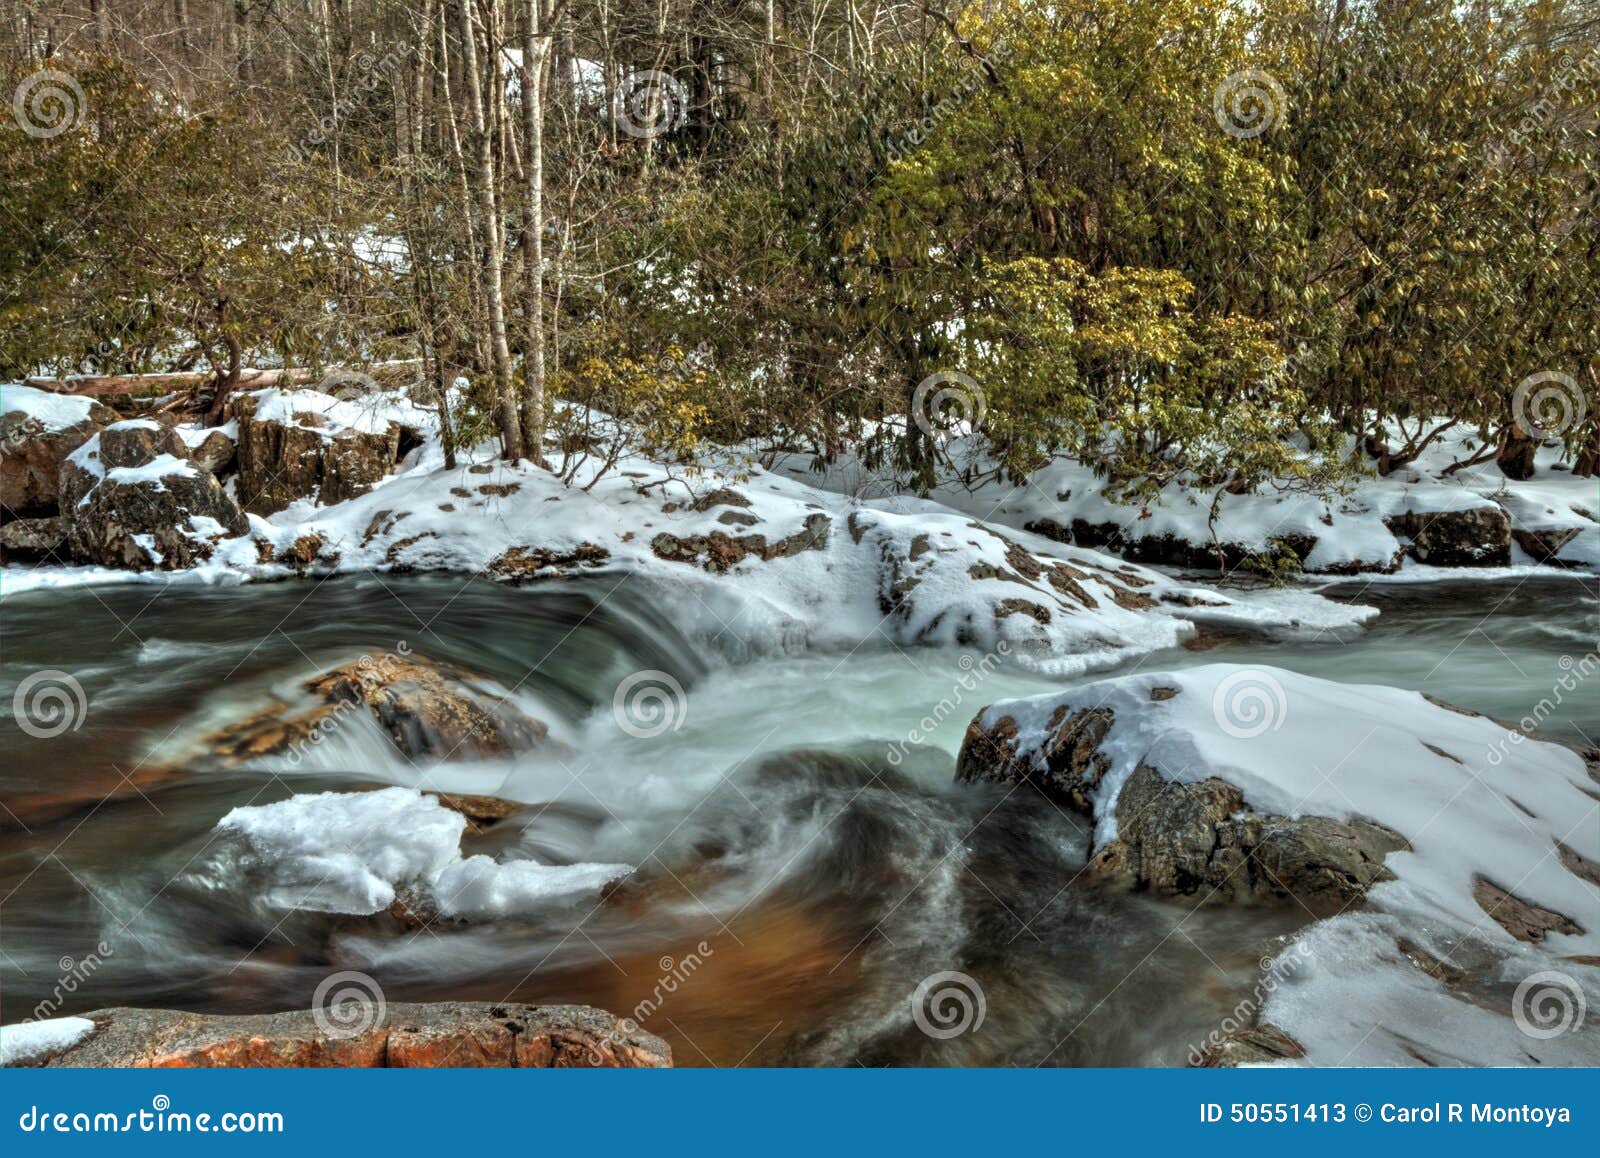 waters of oconaluftee river in the great smoky mountains